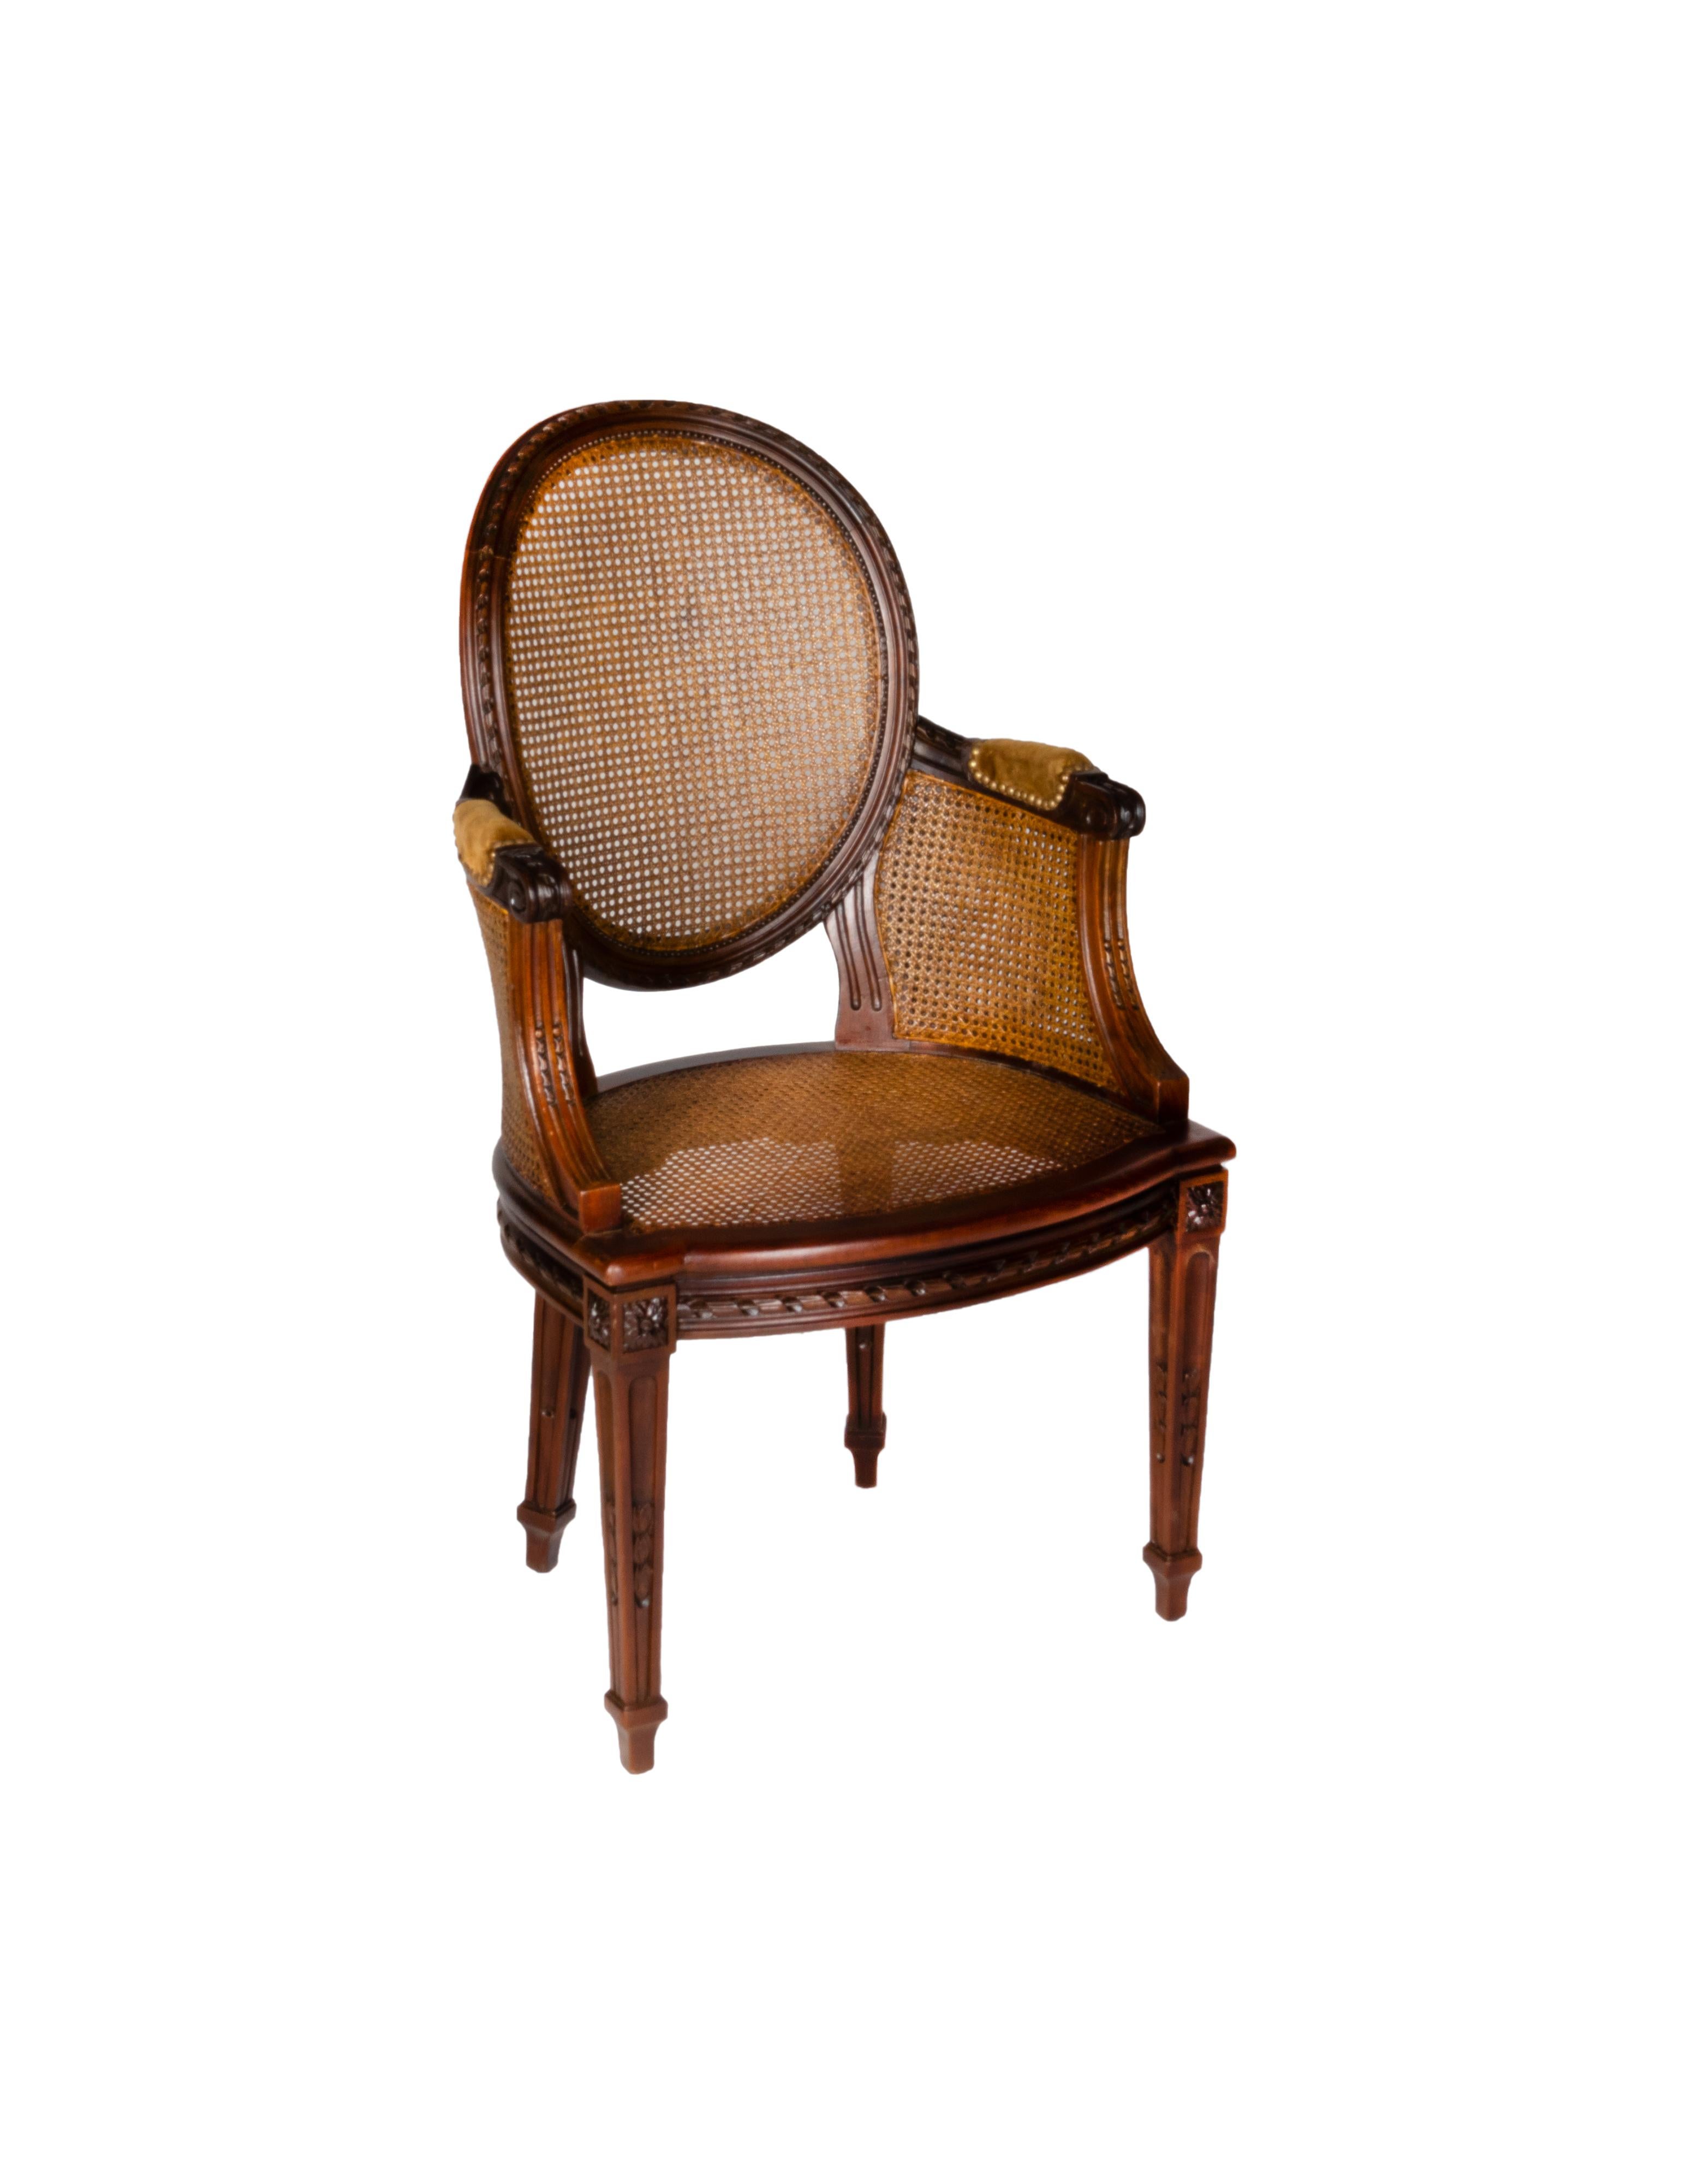 A oval armchair with ribbed legs, elliptical seat and backrest, recurve armrests, seat and backrest in woven natural straw in excellent condition.

Marks of use on the arms. Intact natural straw seats. 